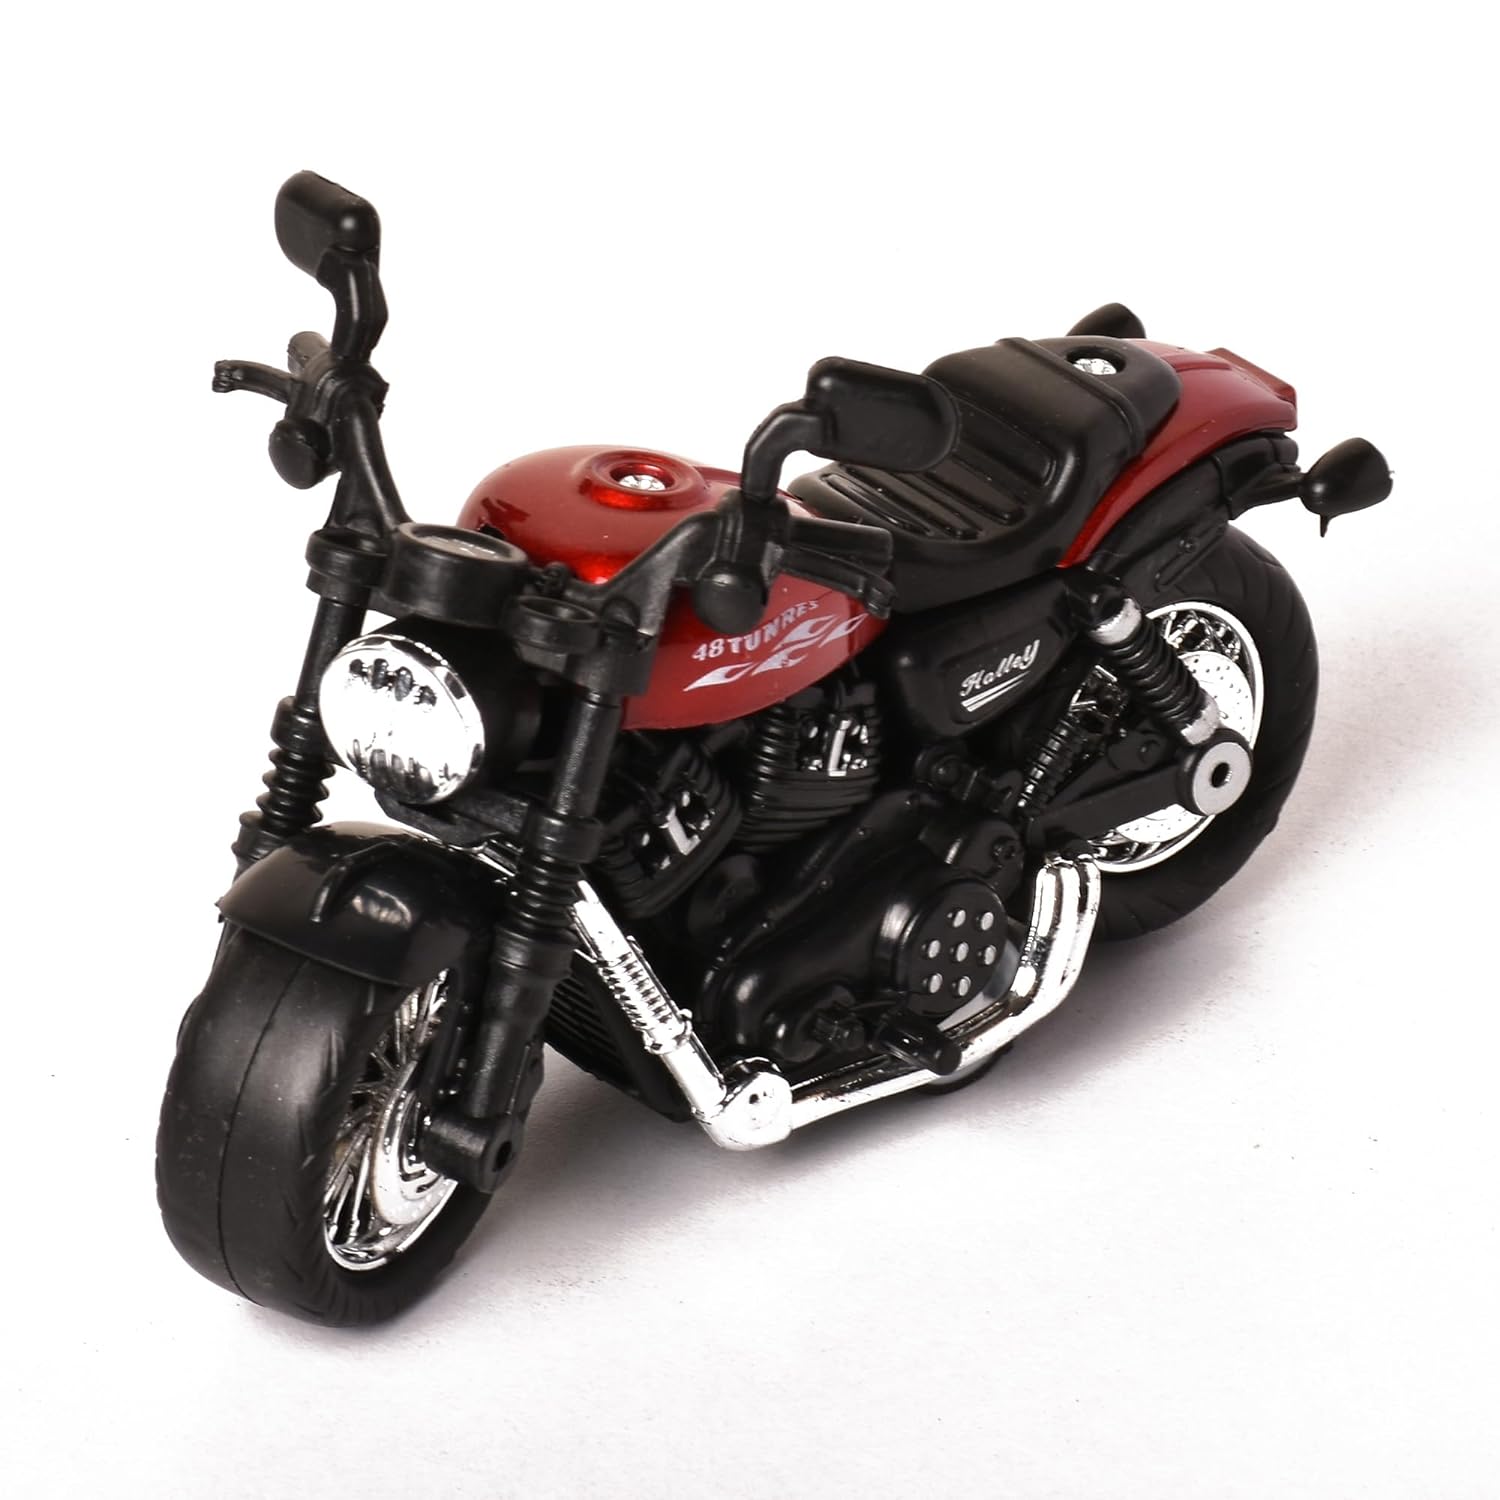 Braintastic Model Diecast Metal Bike Toy Vehicle Pull Back Friction Car with Openable Doors Light & Music Toys for Kids Age 3+ Years (Royal Enfield Red)